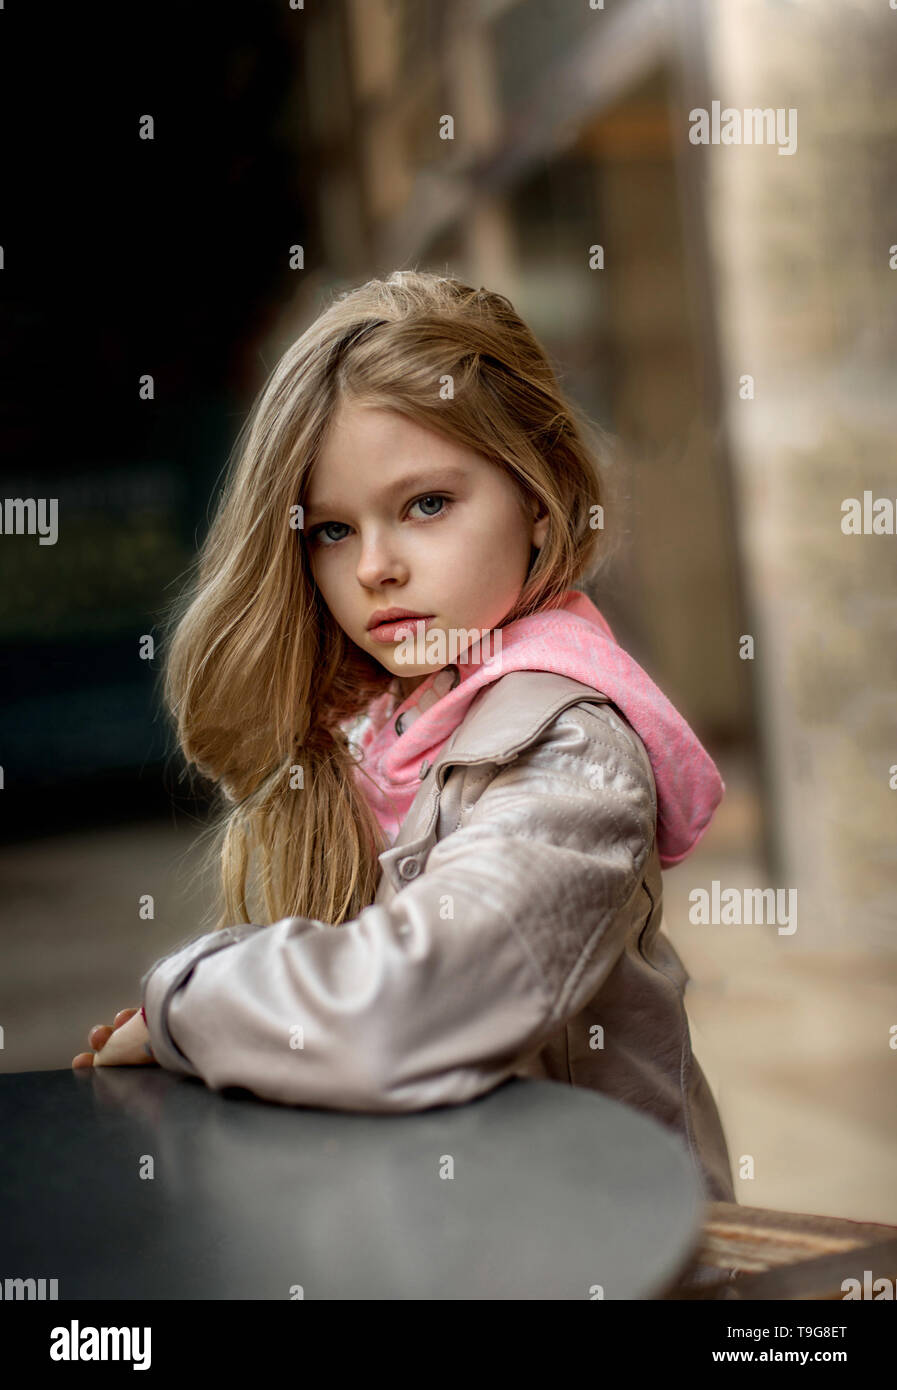 Very Beautiful Little Girl With Long Blonde Hair And Blue Eyes